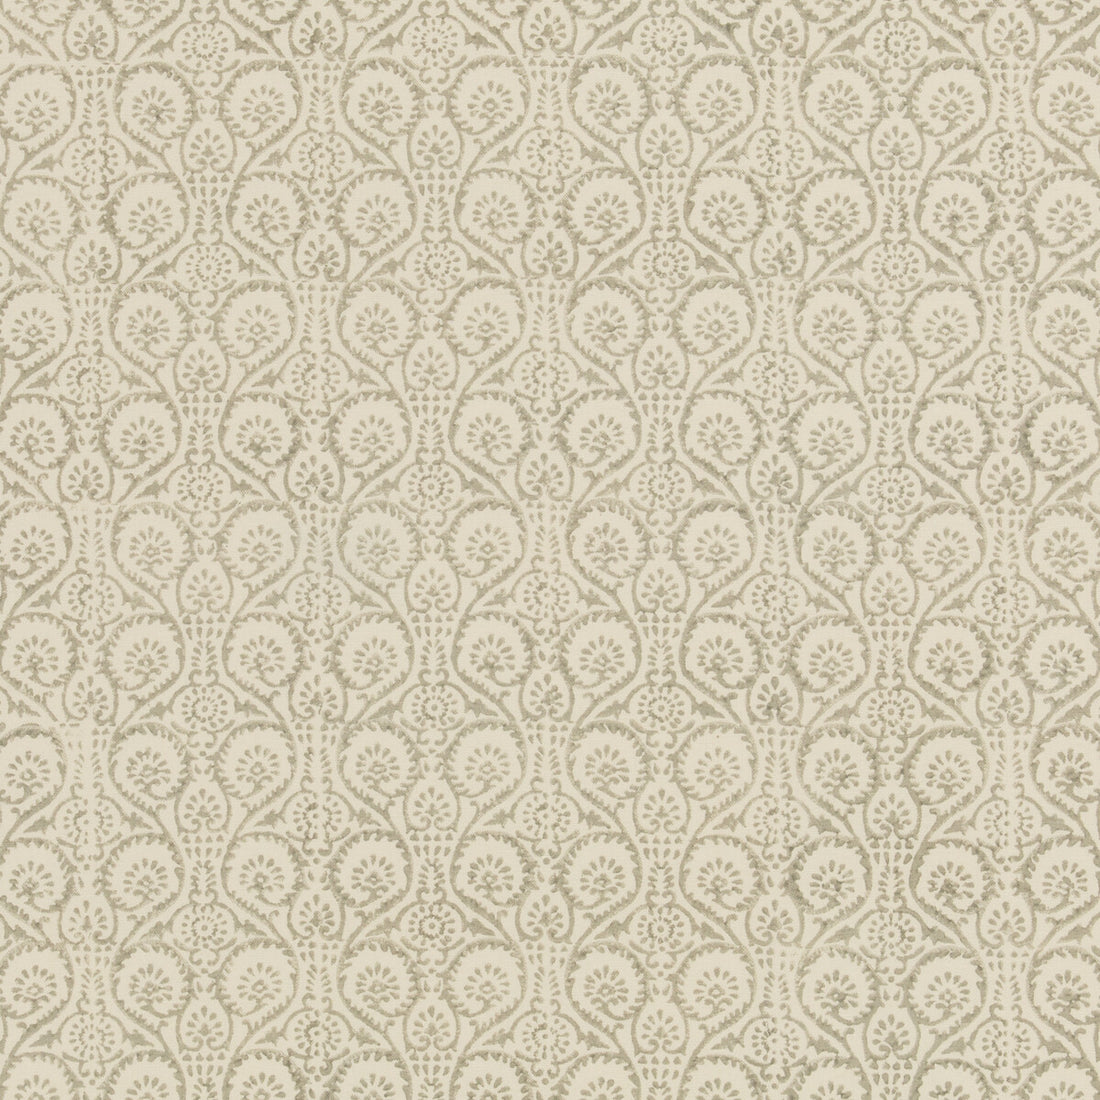 Pollen Trail fabric in stone color - pattern PP50481.4.0 - by Baker Lifestyle in the Block Party collection